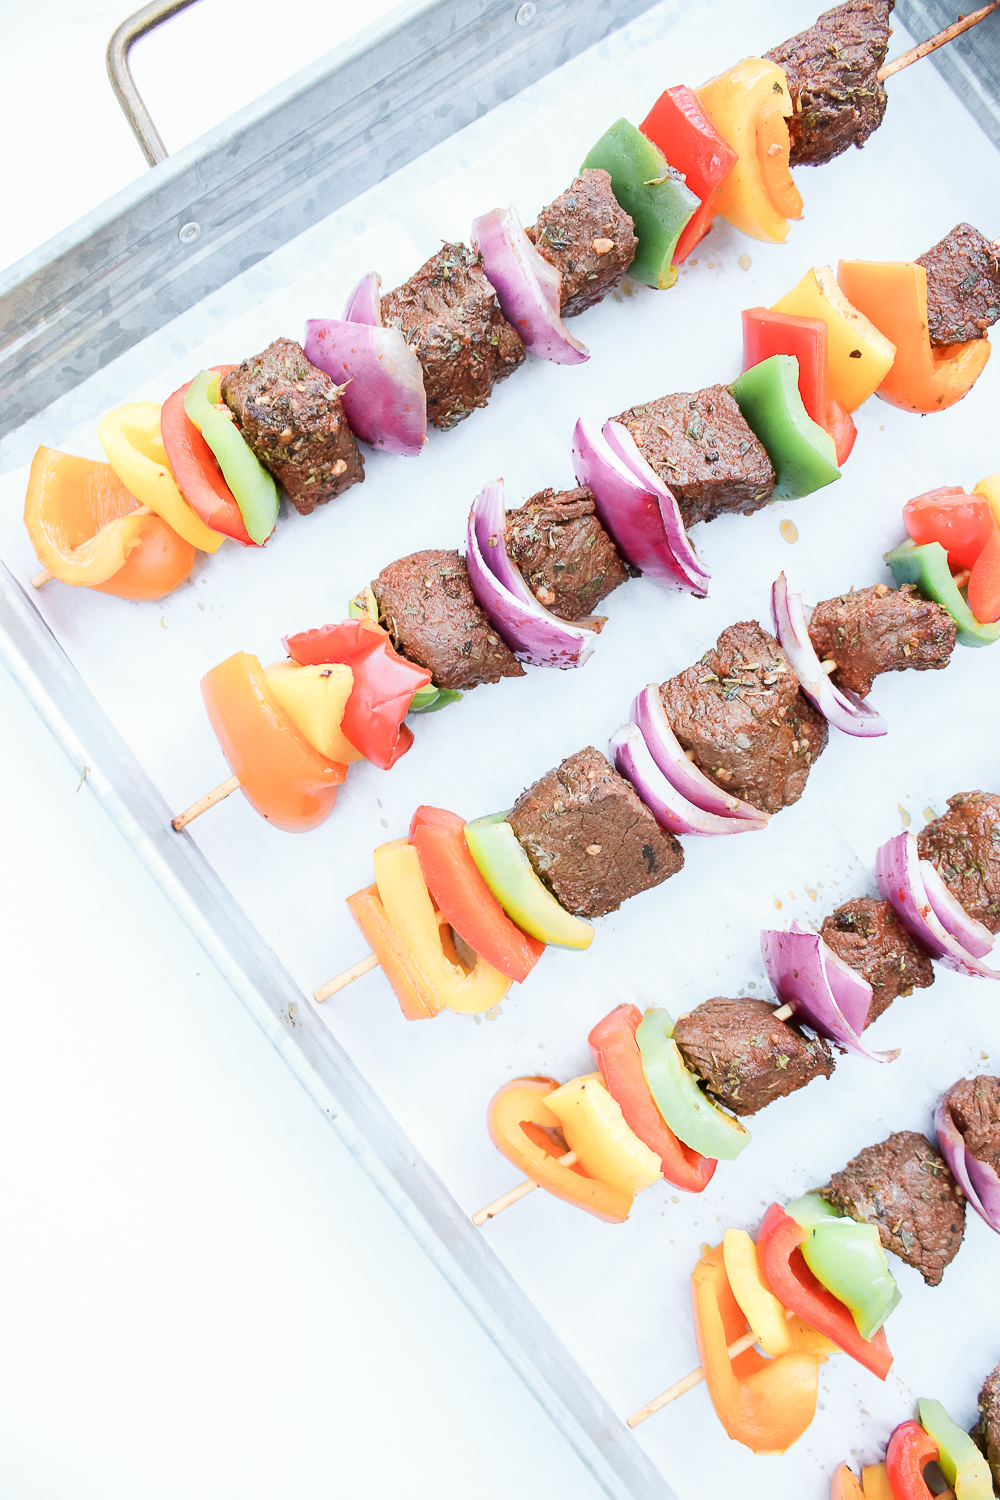 Baked shish kabob recipe adapted from The Food Network by blogger Stephanie Ziajka on Diary of a Debutante